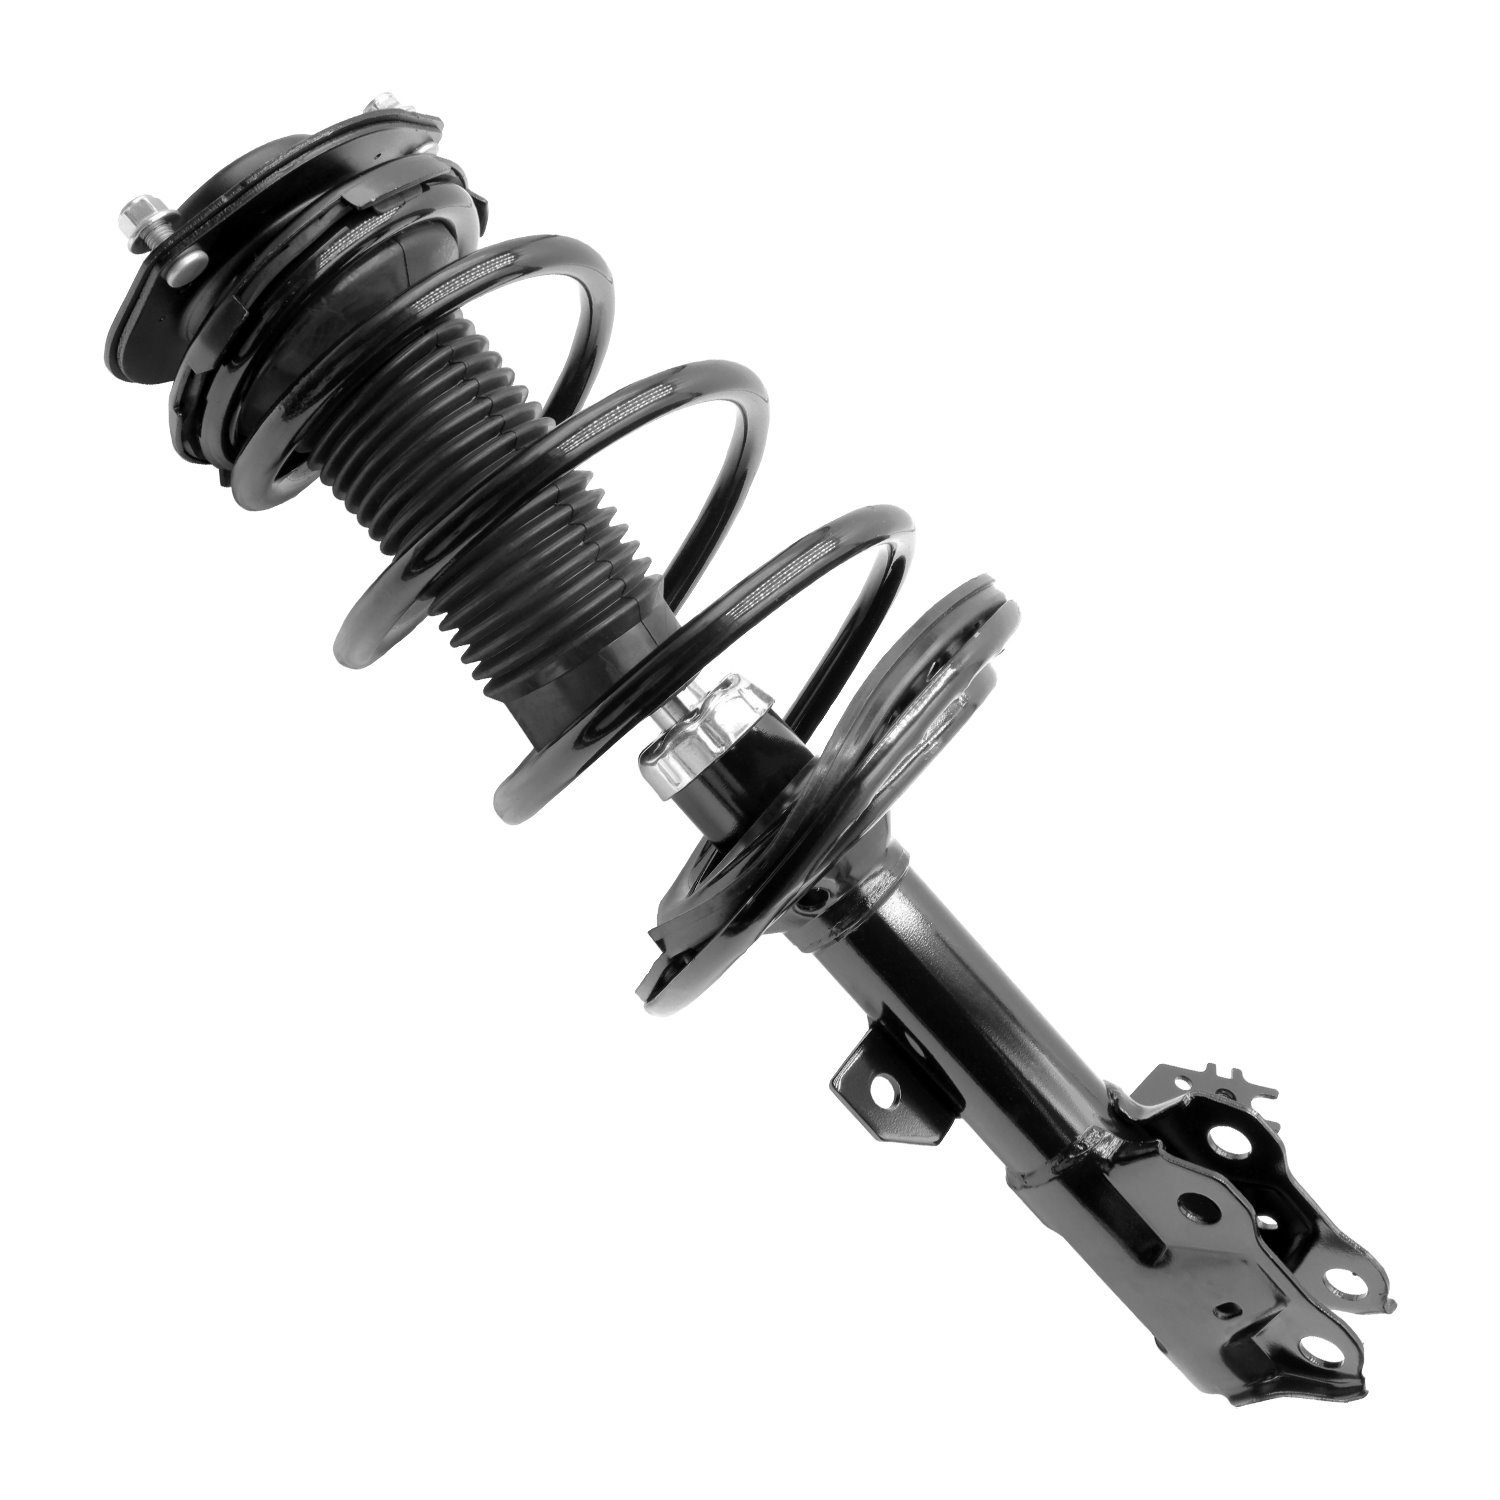 13283 Front Suspension Strut & Coil Spring Assemby Fits Select Toyota Avalon